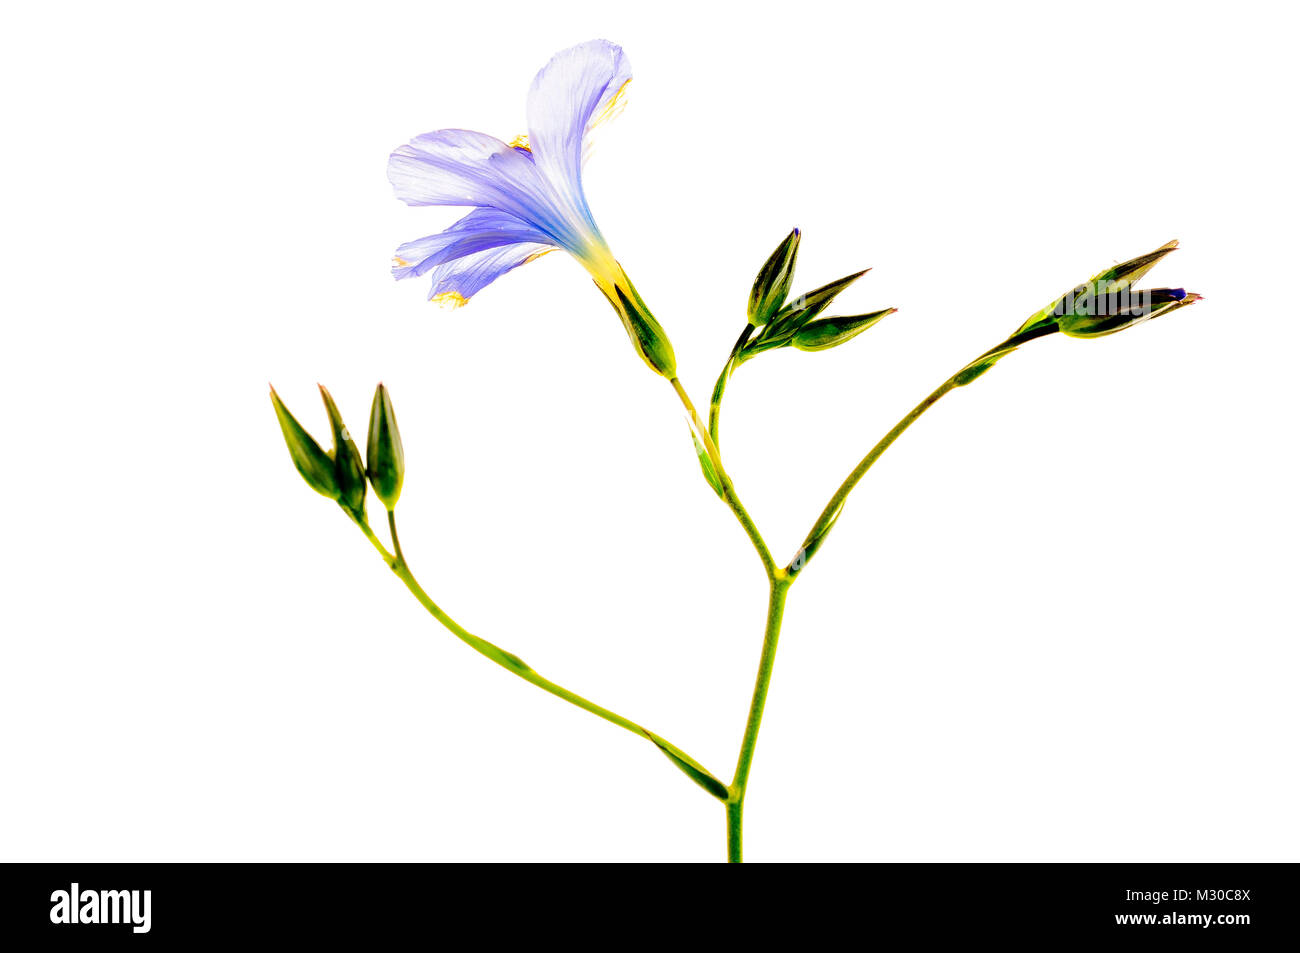 An studio violet flower work using a High key isolating the plant Stock Photo